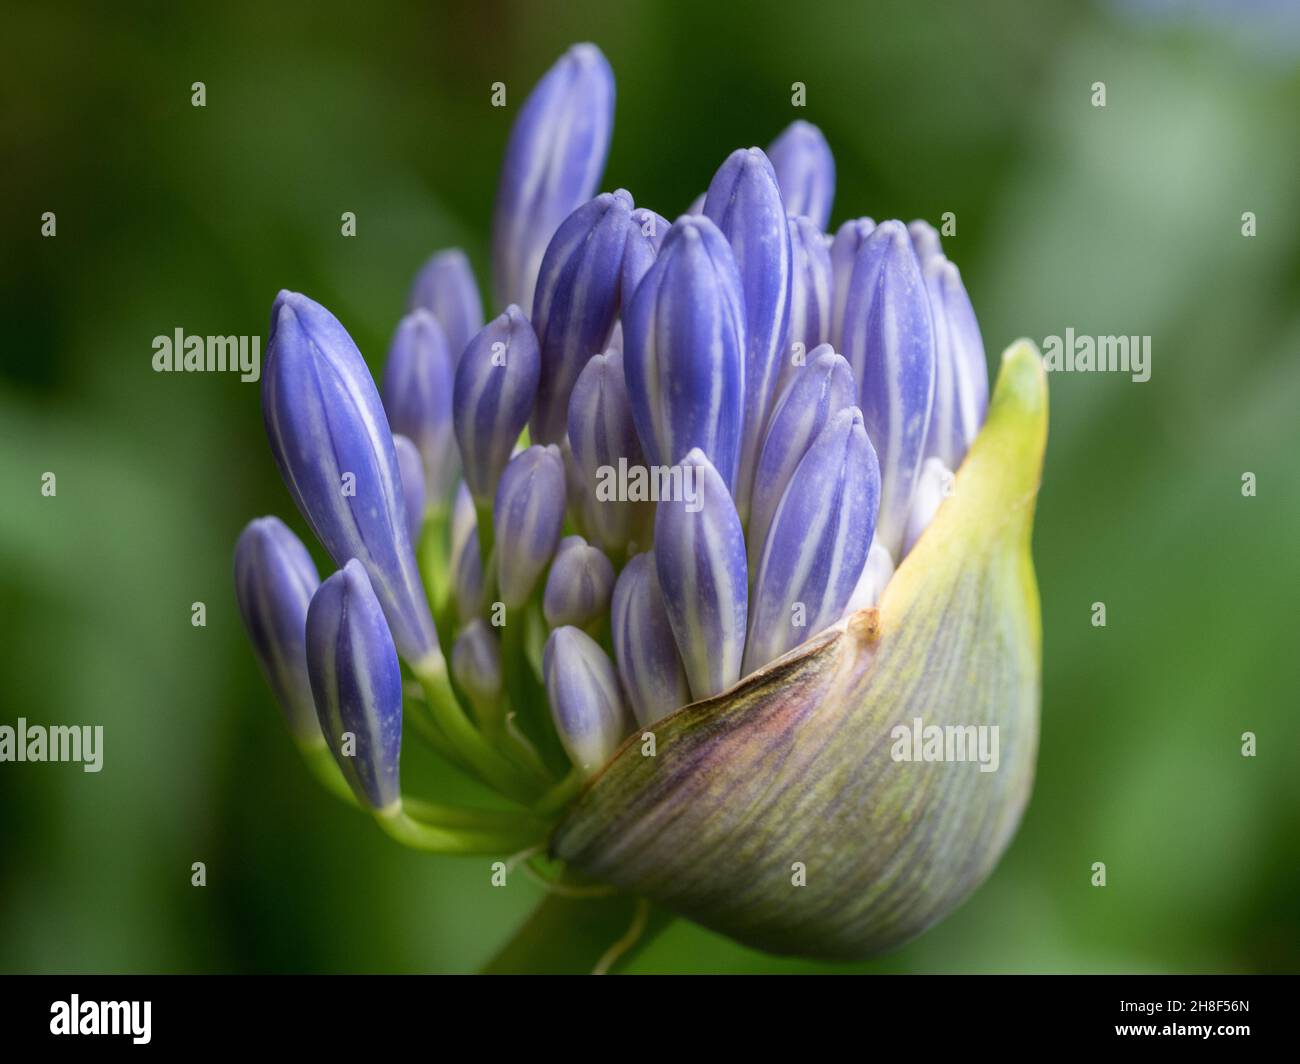 Closeup of a Purple Blue Agapanthus plant flower buds opening. Flowering near the end of spring. Blurred green background Stock Photo